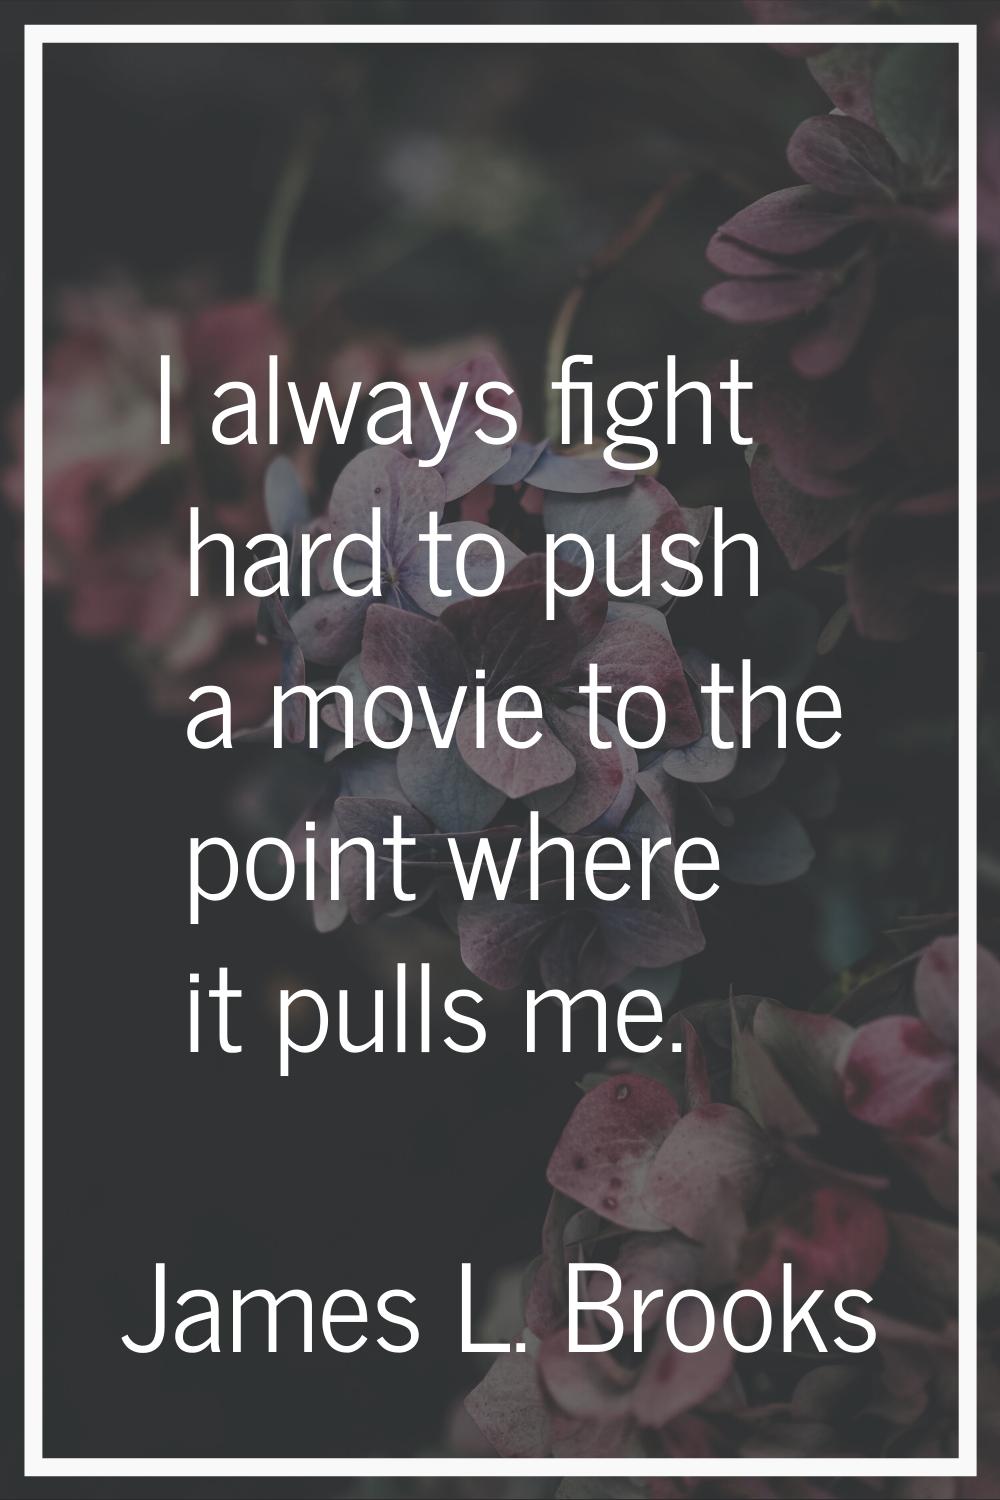 I always fight hard to push a movie to the point where it pulls me.